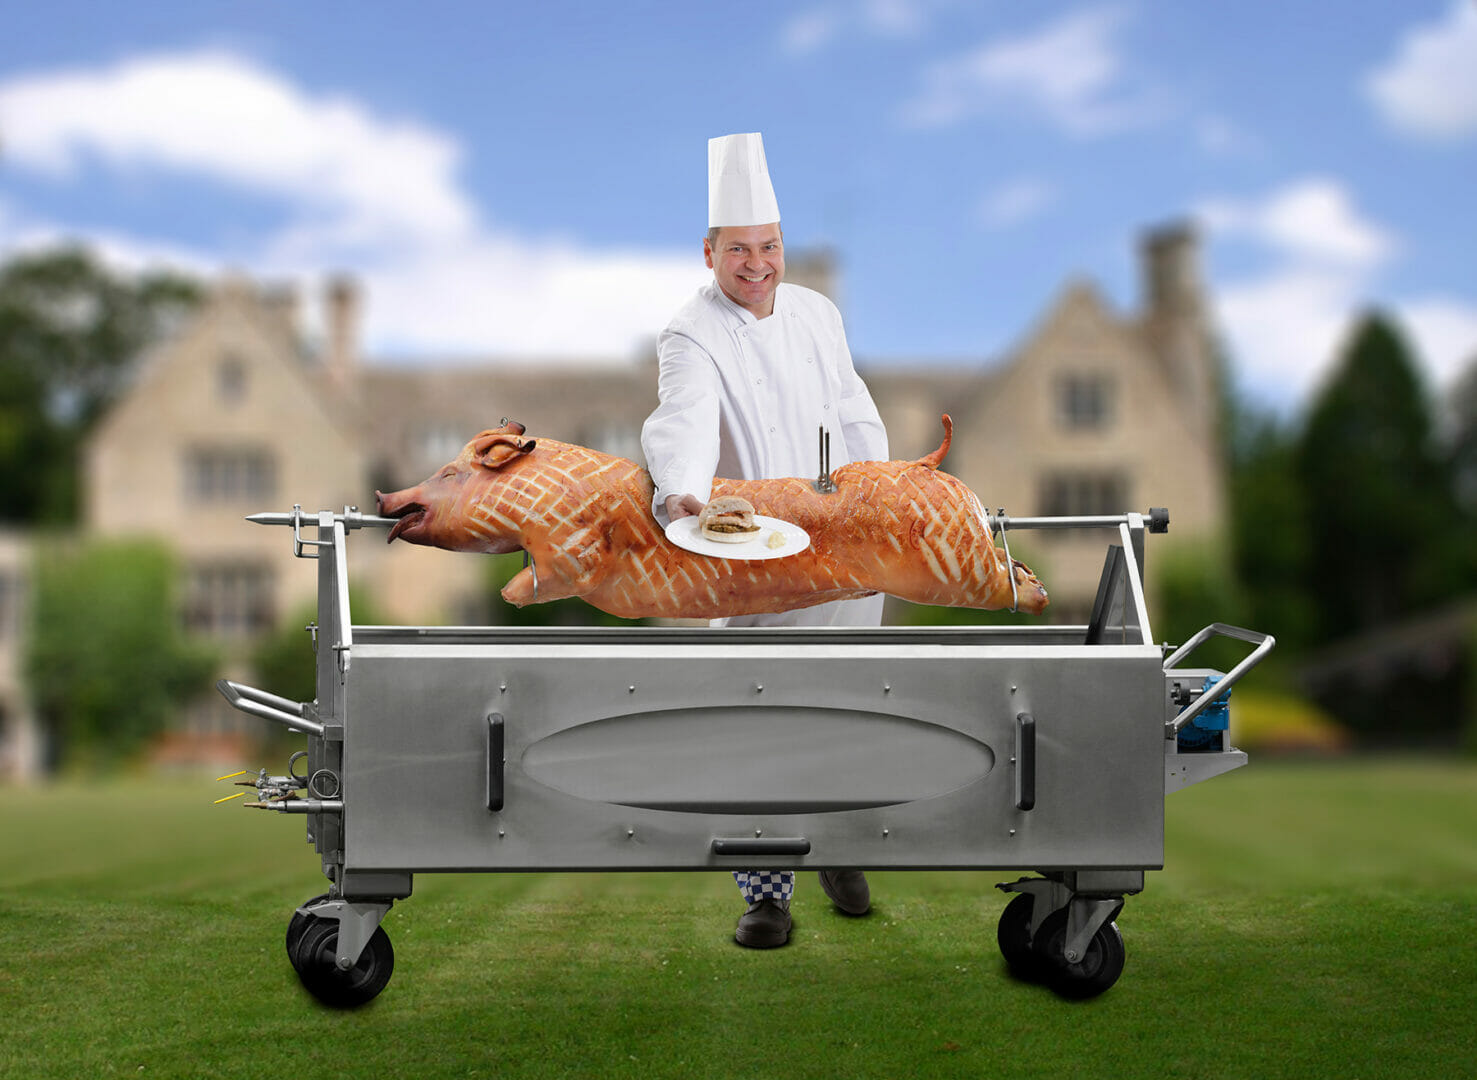 Elite Hog Roast Machines teams up with Trailblazer Barbecues to offer the most comprehensive range of outside catering equipment currently available